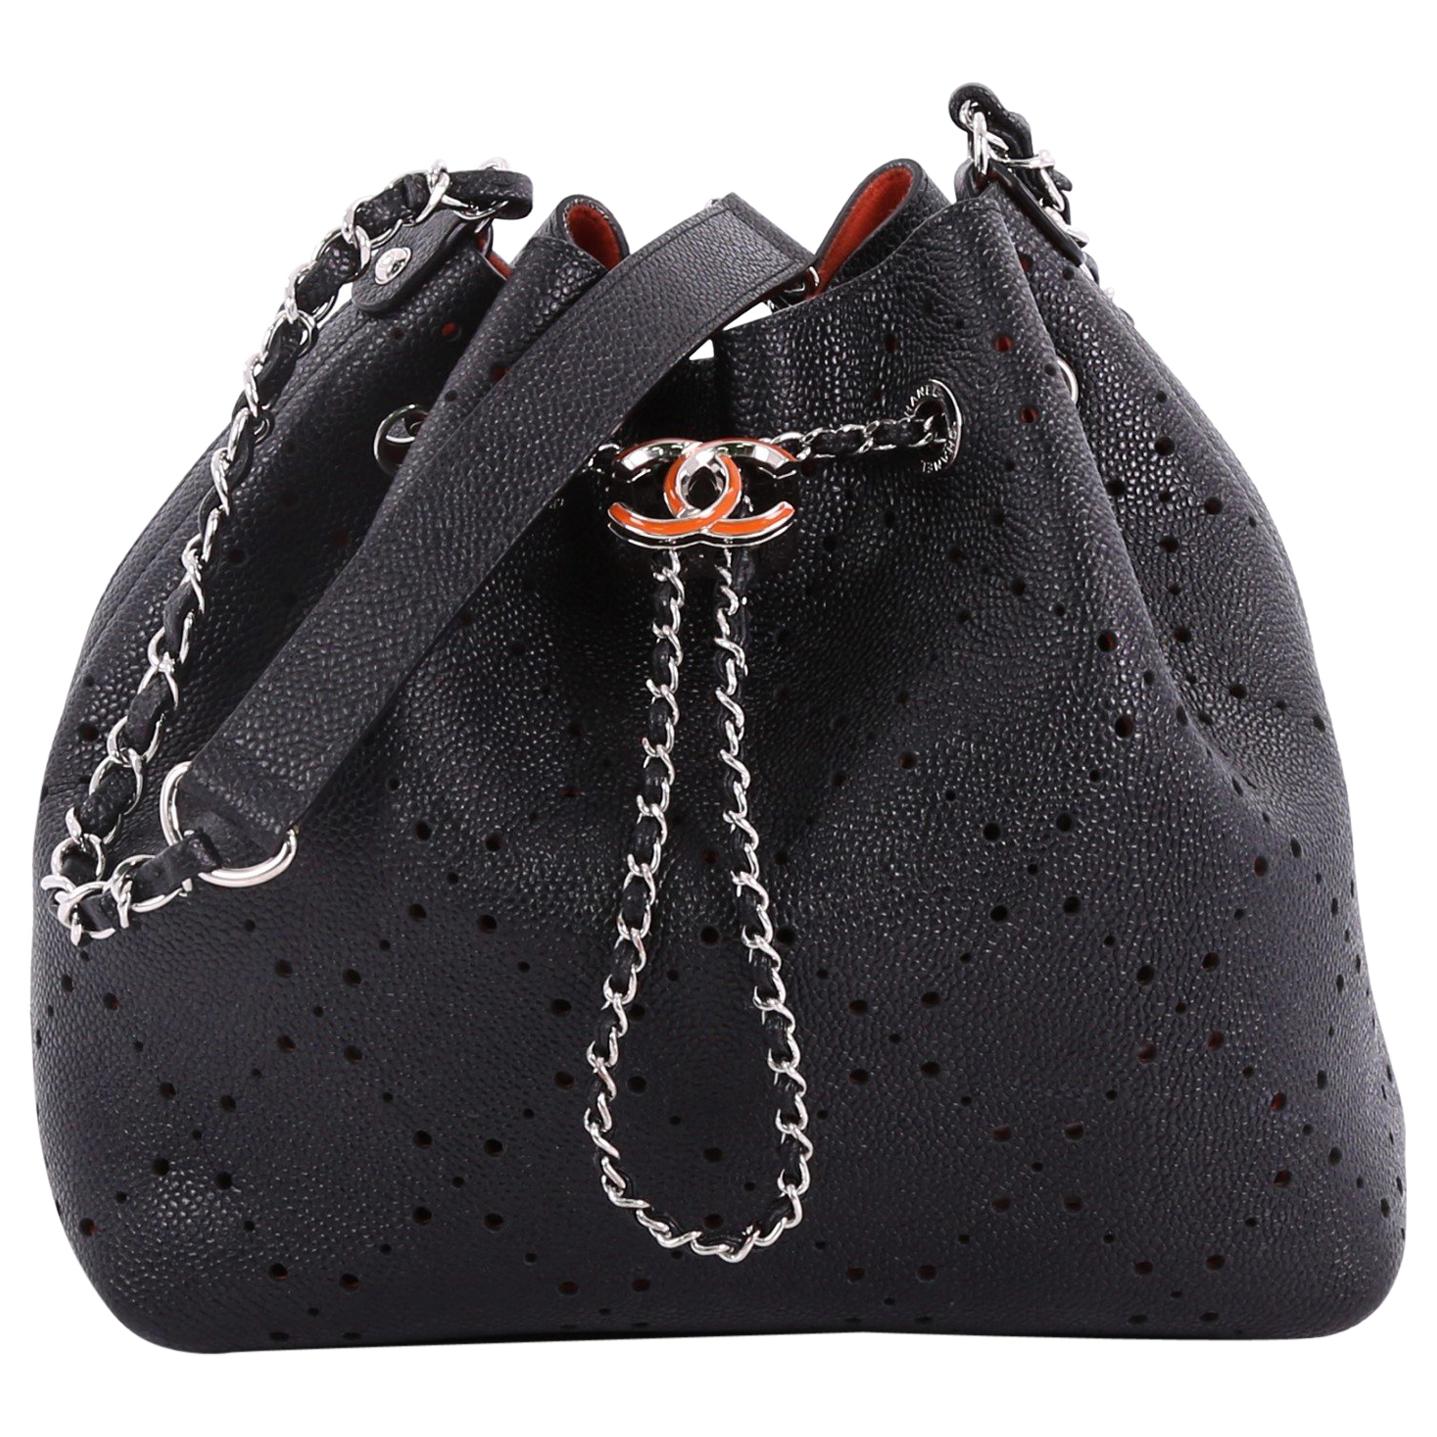 Chanel Black See Through Perforated Leather Bucket Bag w Quilted Drawstring